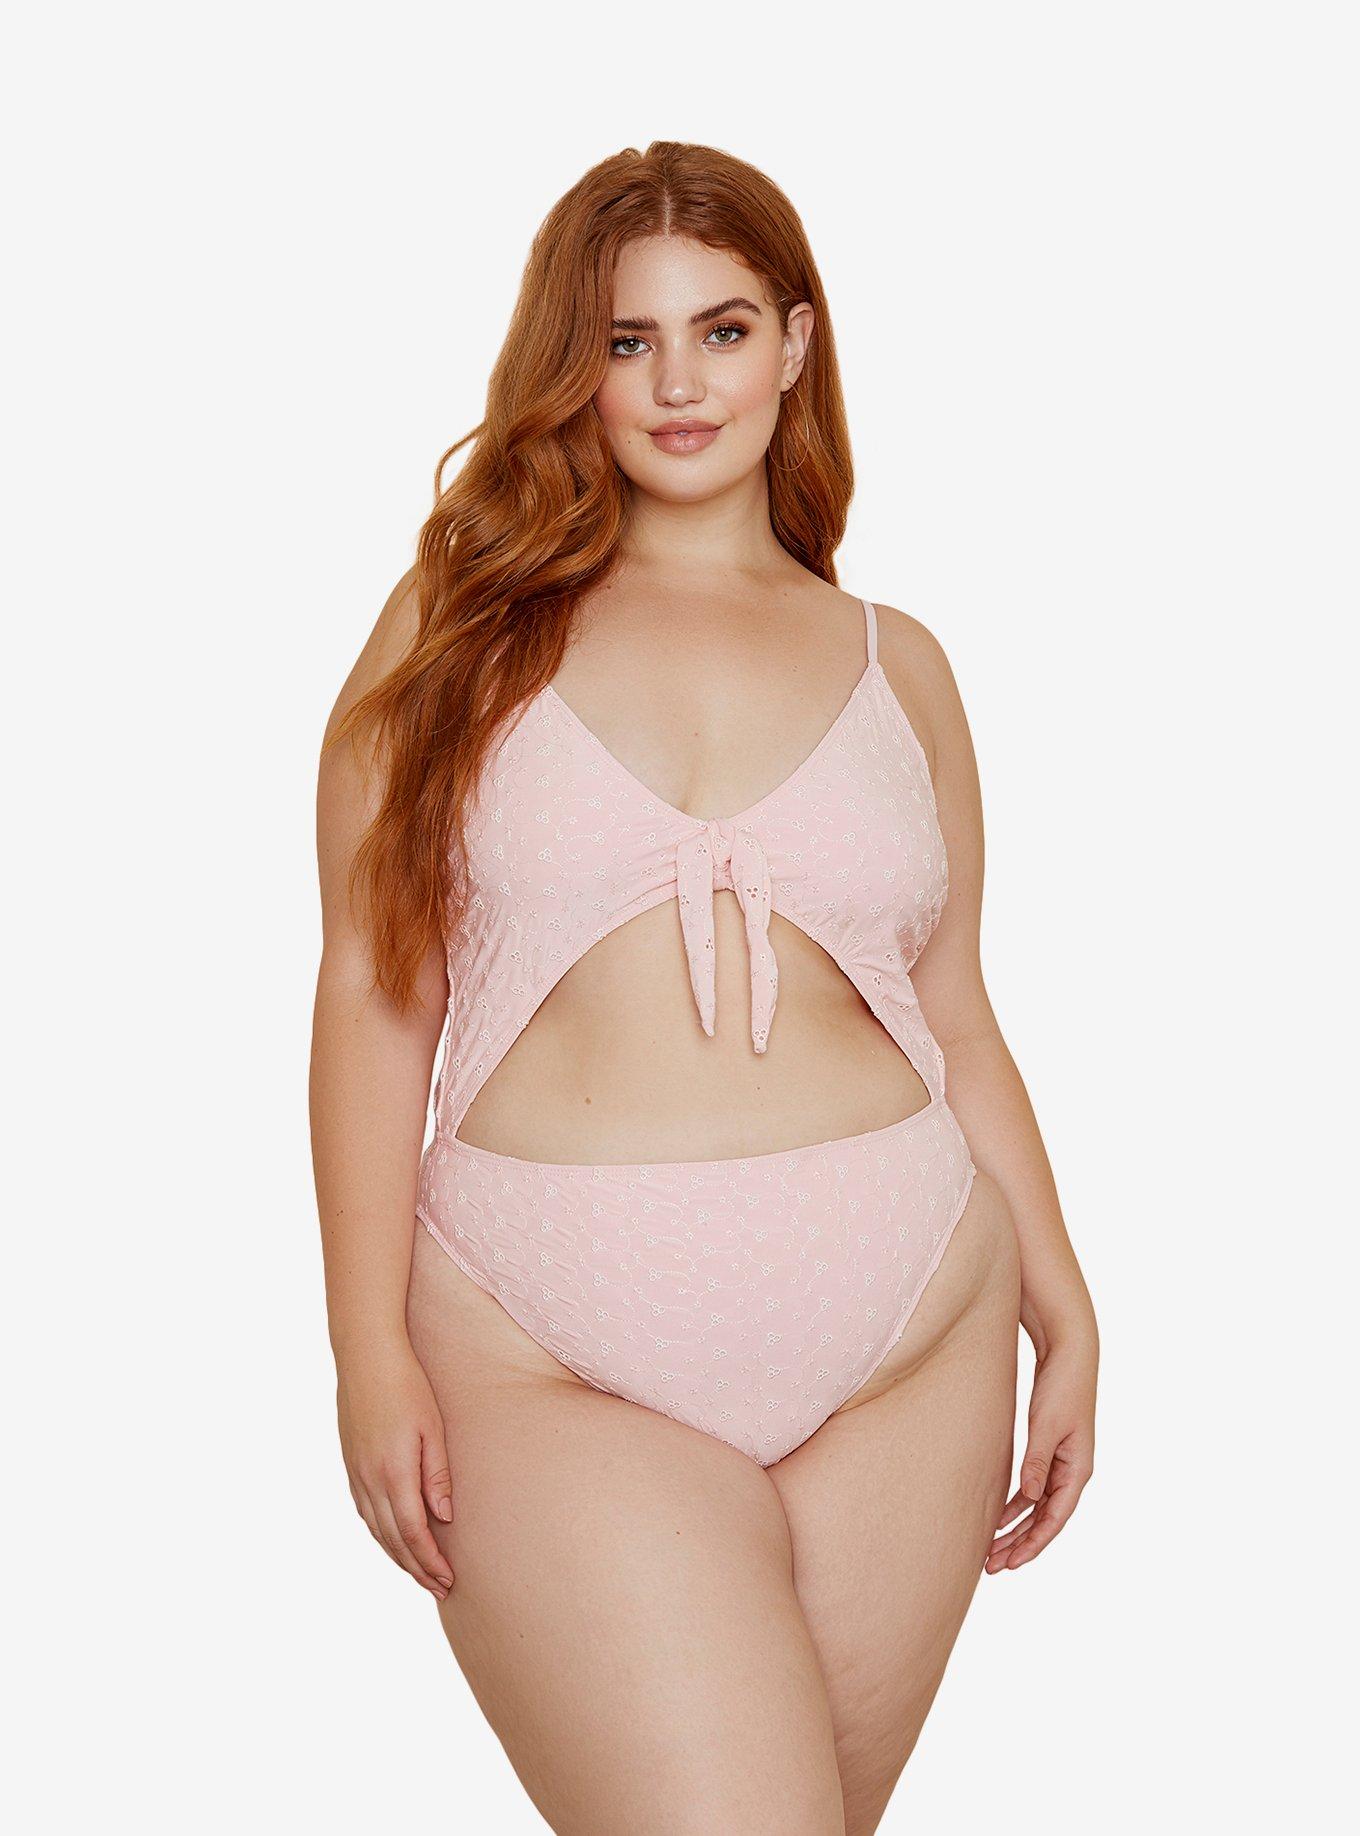 Dippin' Daisy's Glam Swimsuit Rosewater Eyelet Plus Size, PINK, hi-res